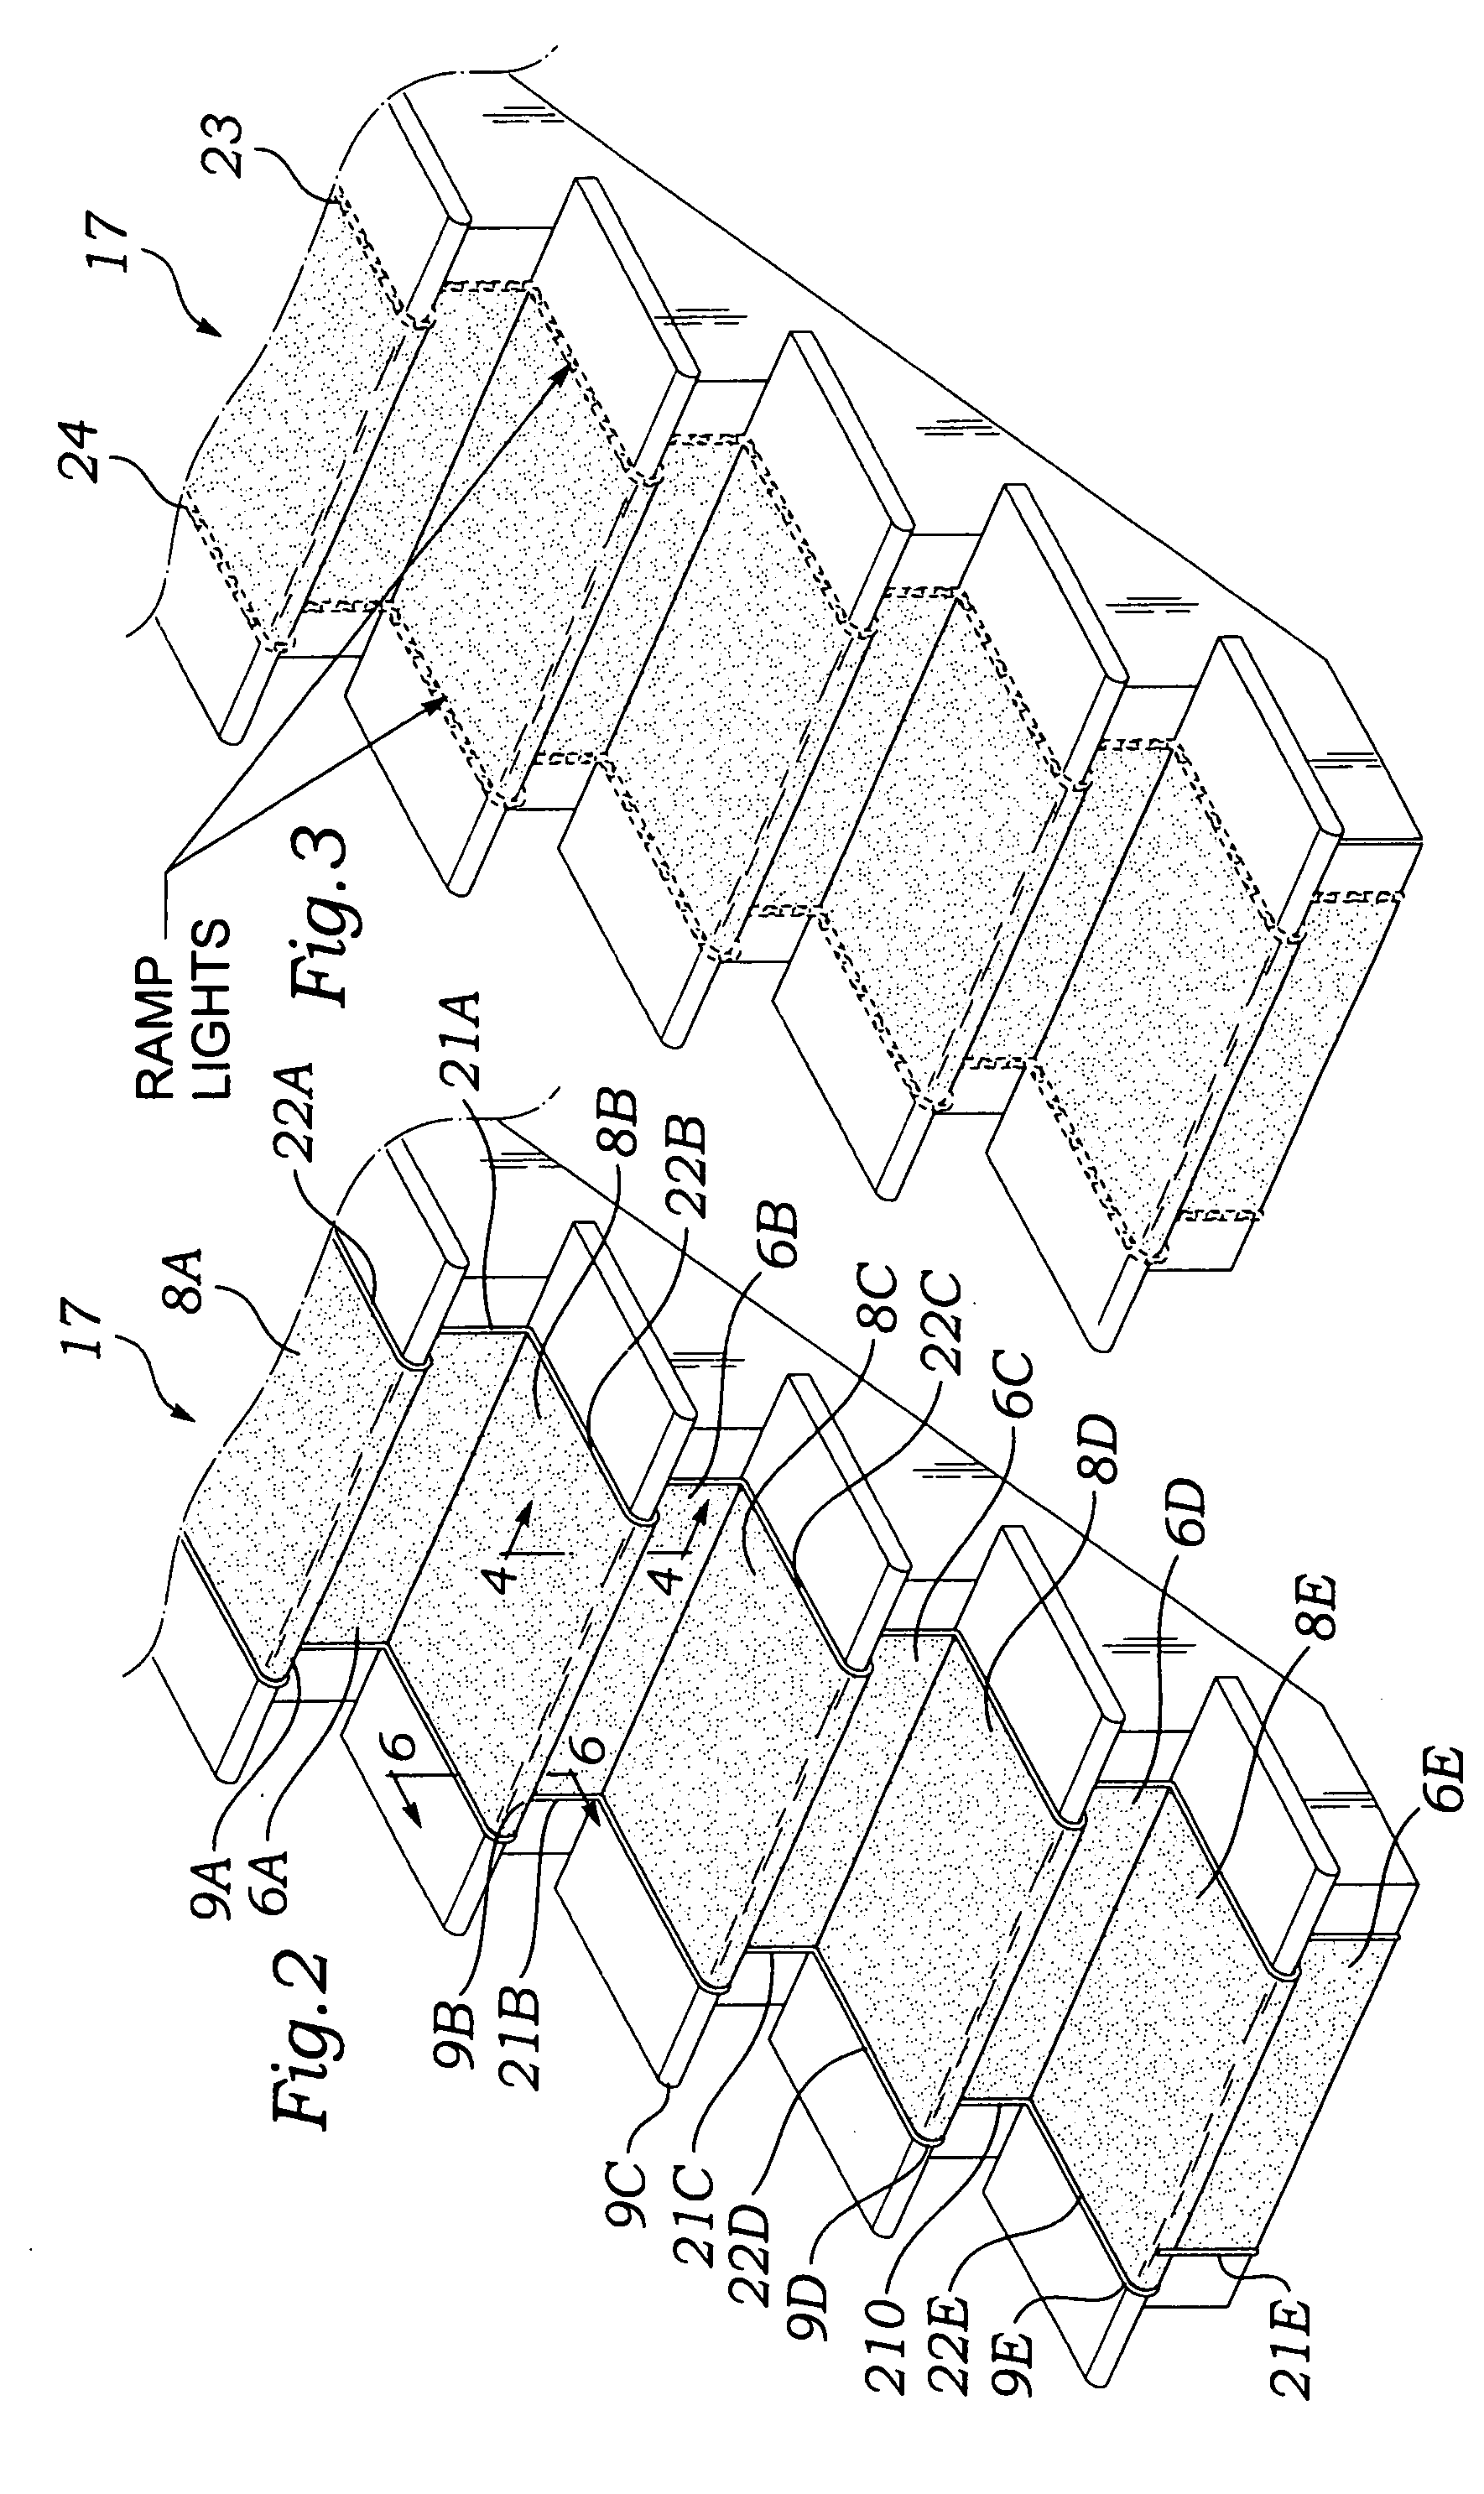 Interchangeable and removably connected geometric carpet sections